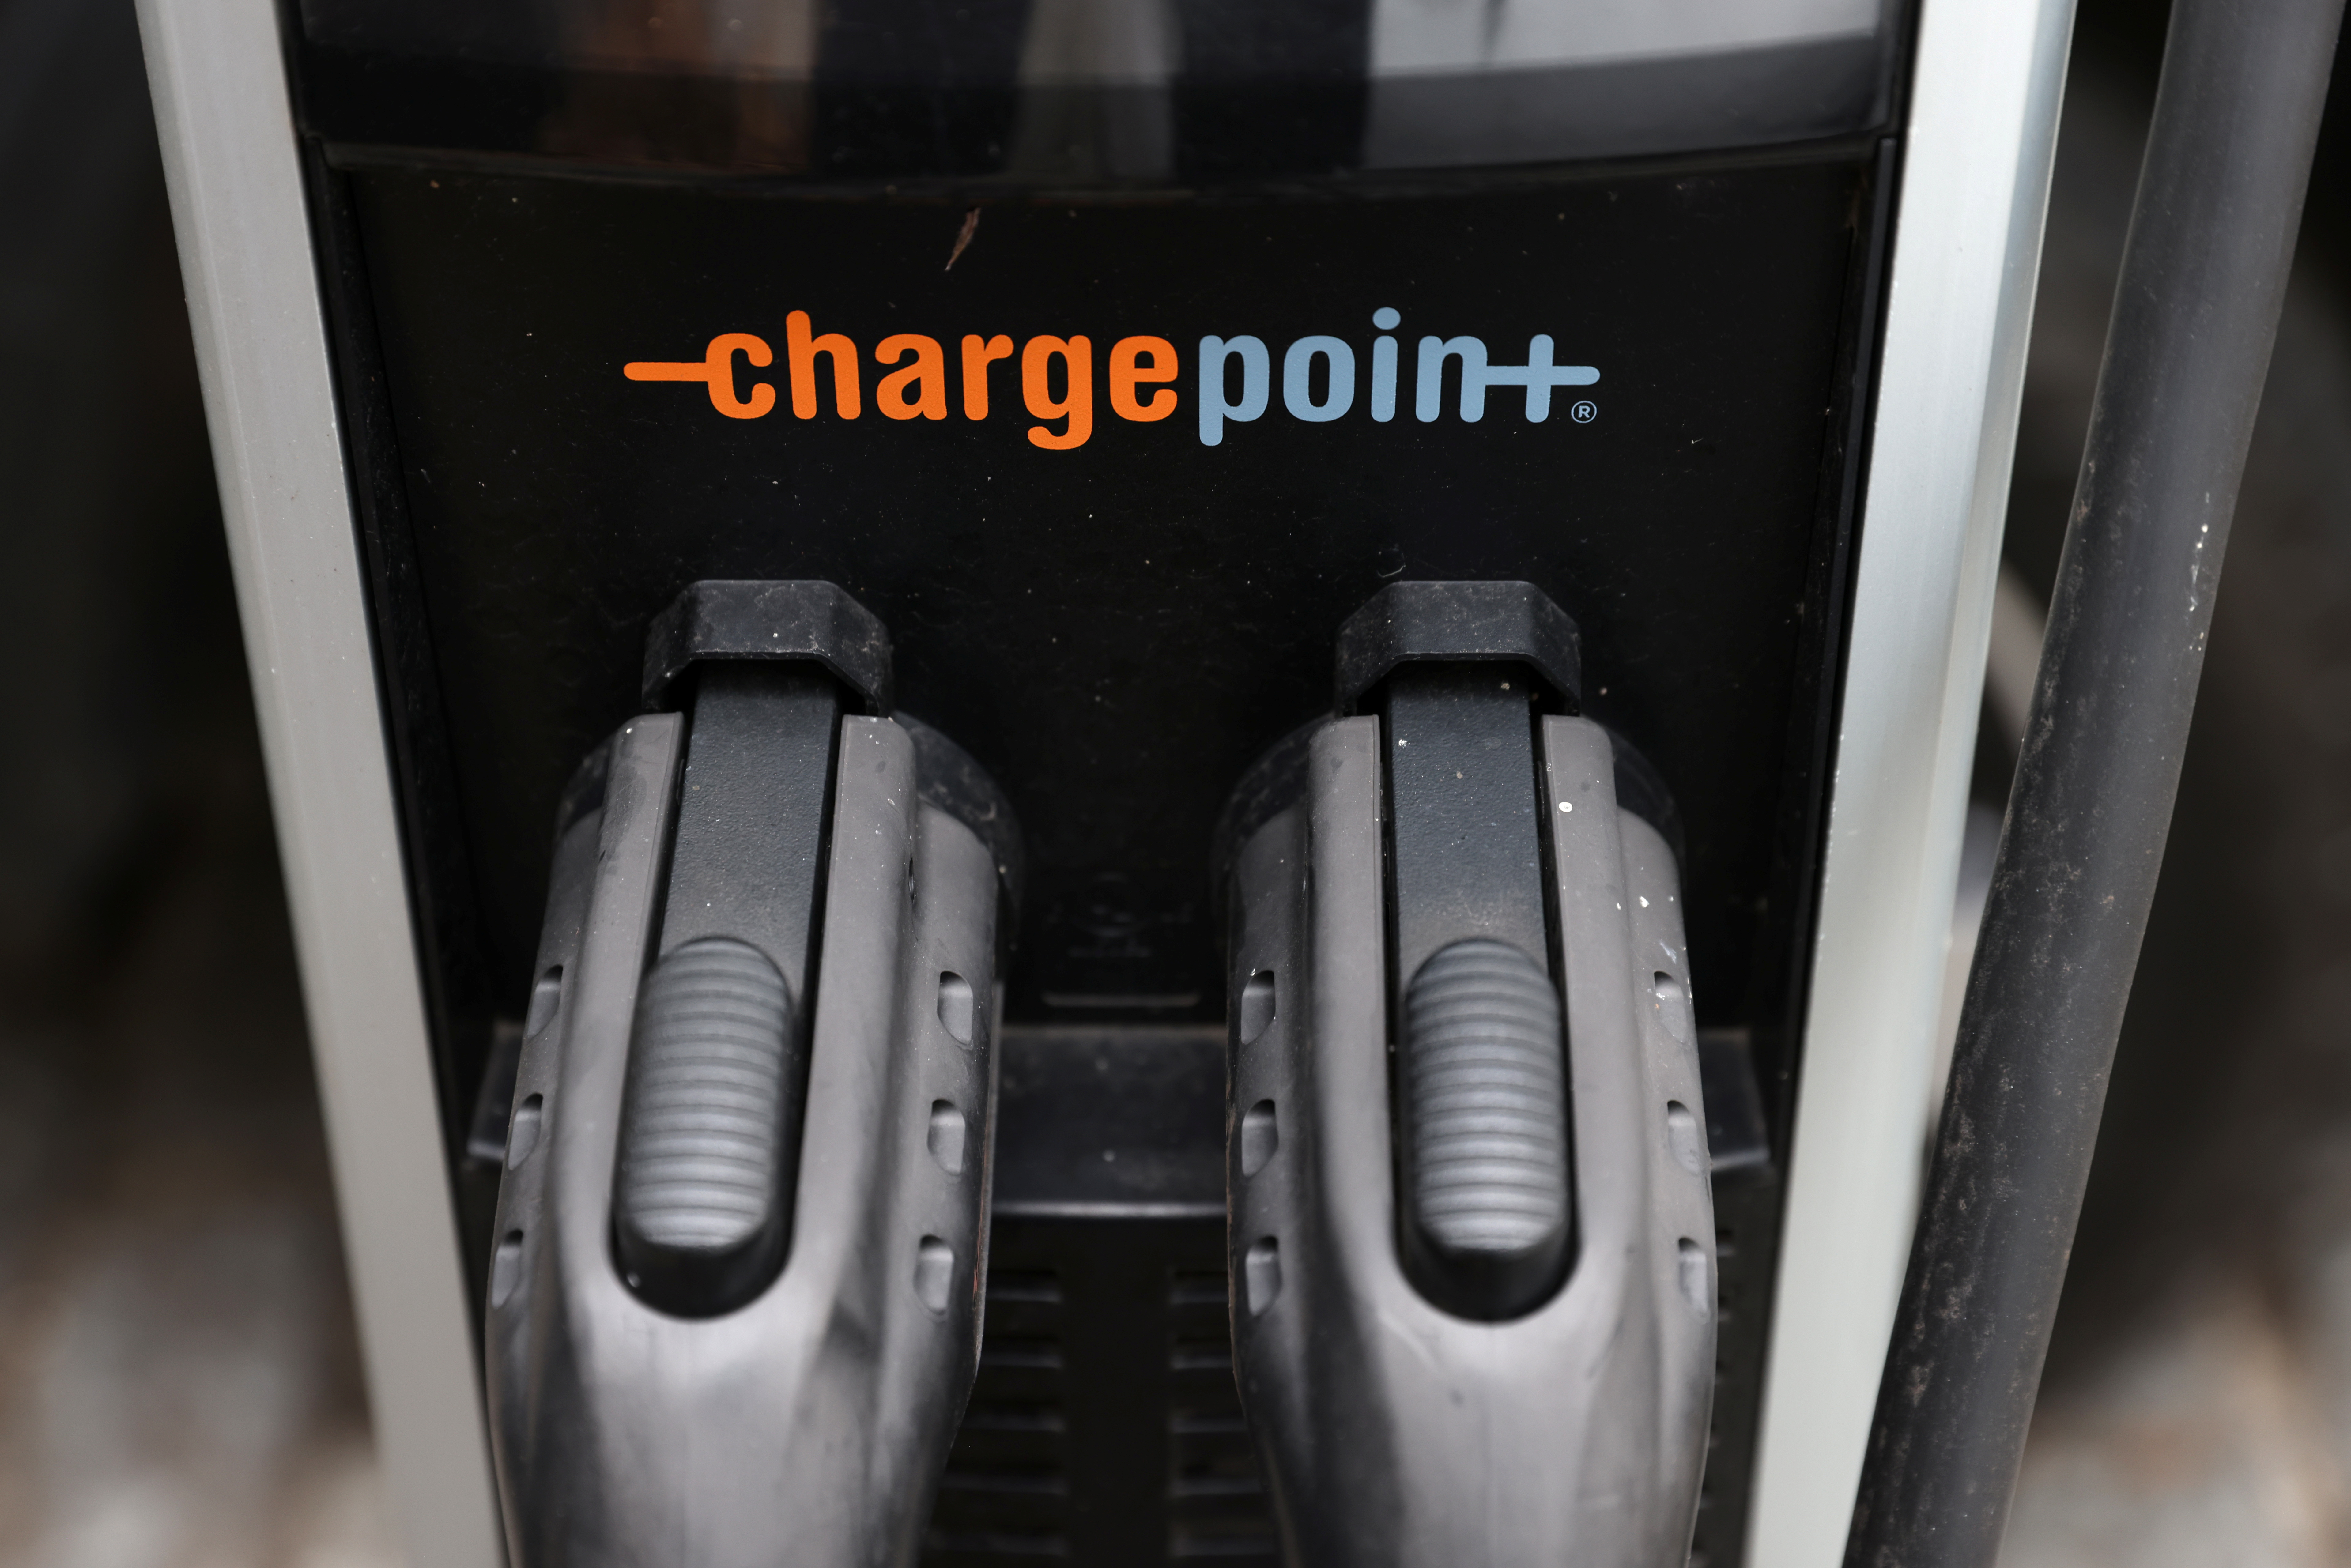 Mercedes and Chargepoint team up to build 400 North American charging hubs